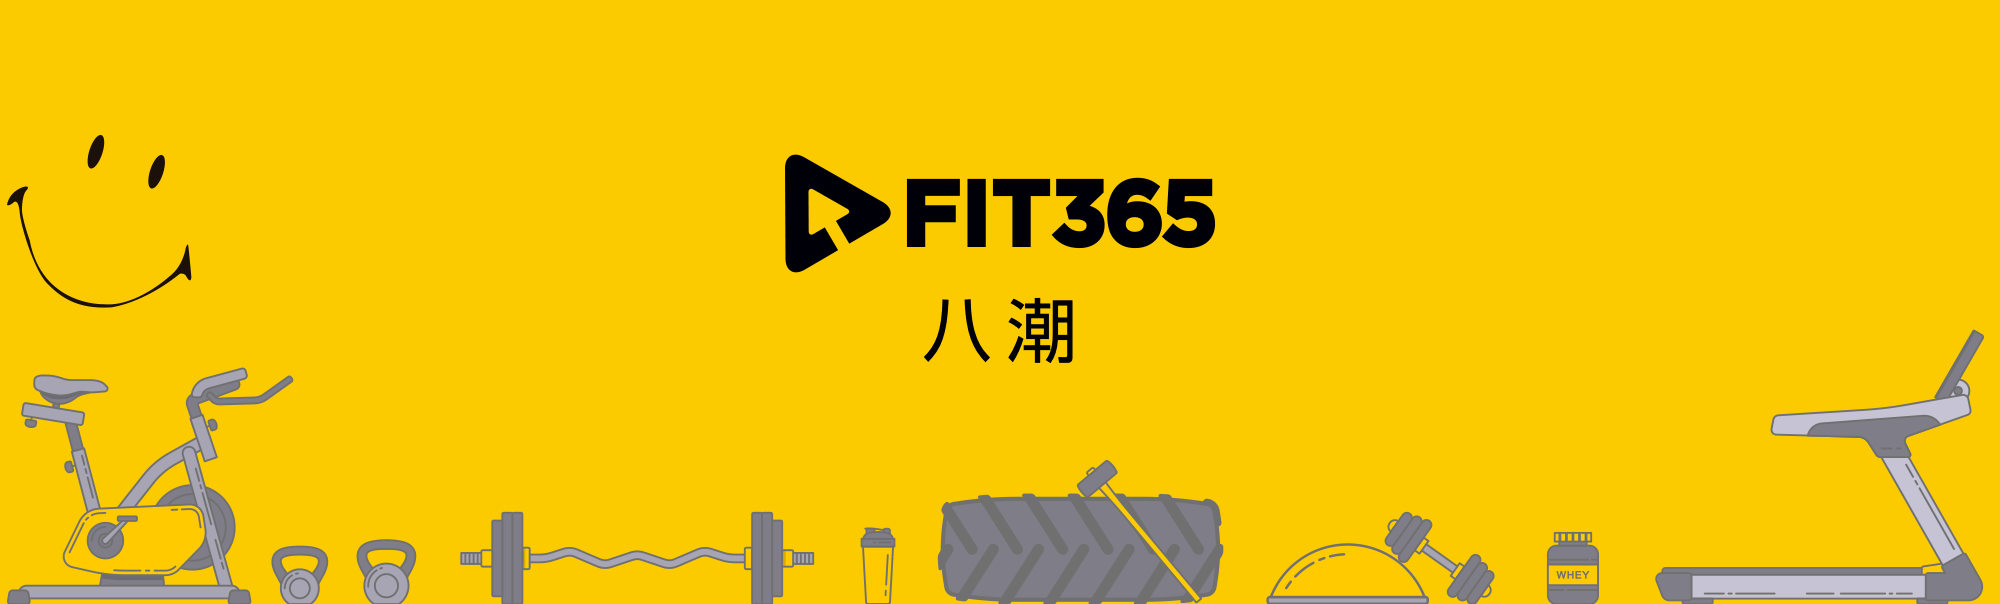 FIT365 八潮